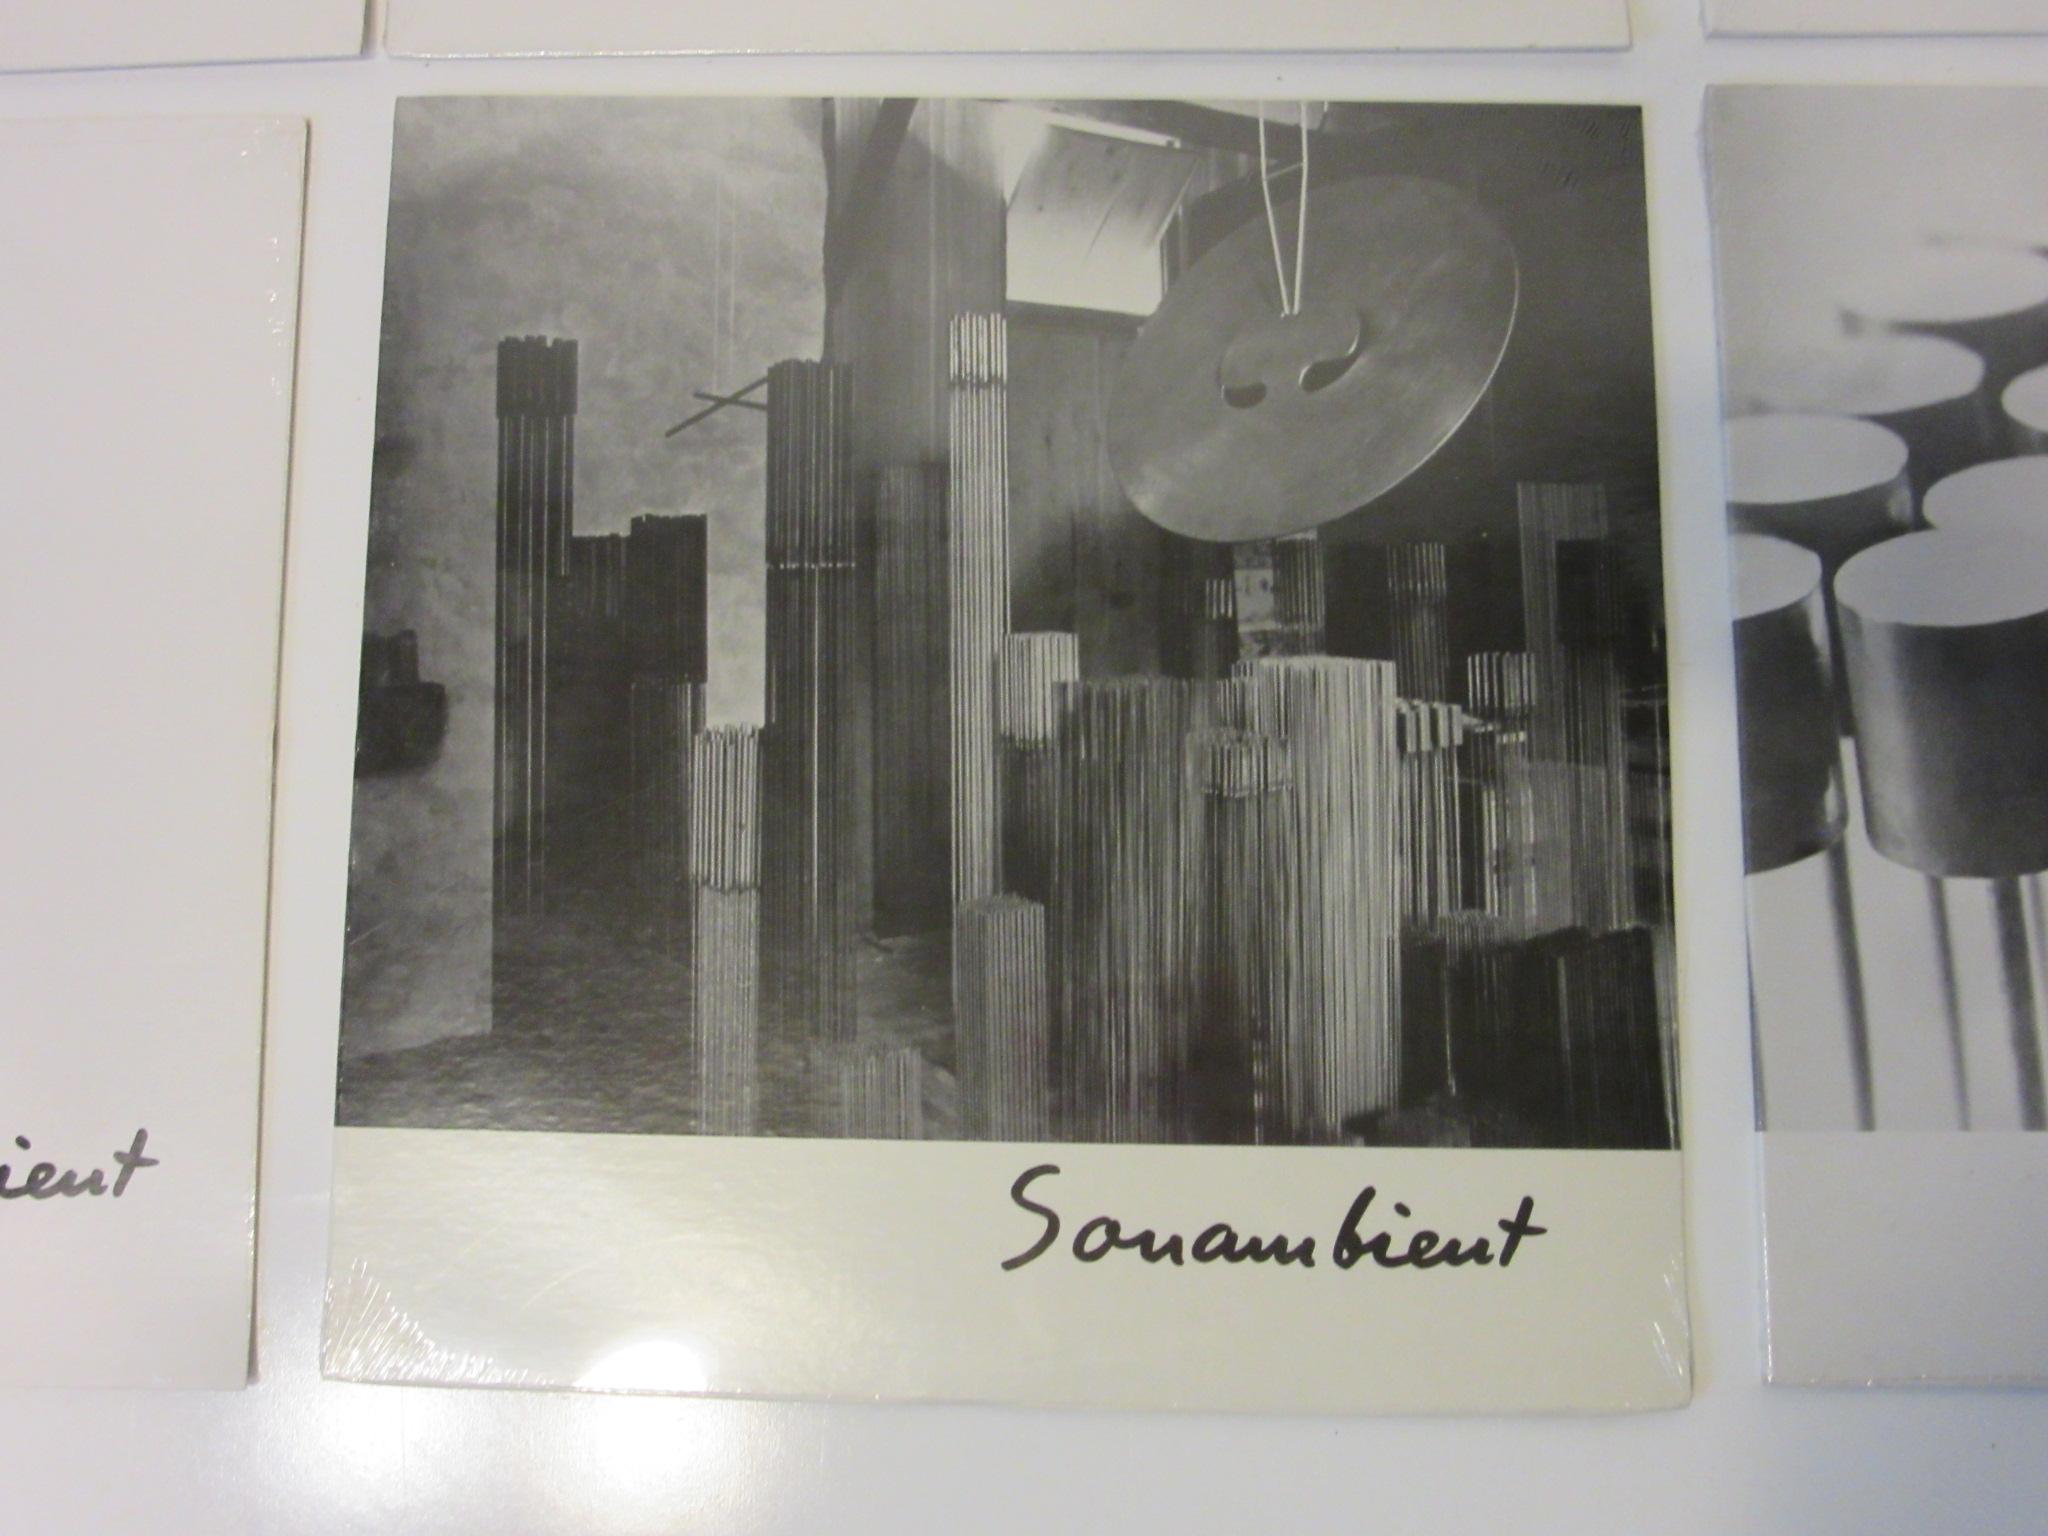 20th Century Harry Bertoia Sonambient Sculpture Sound Record Collection